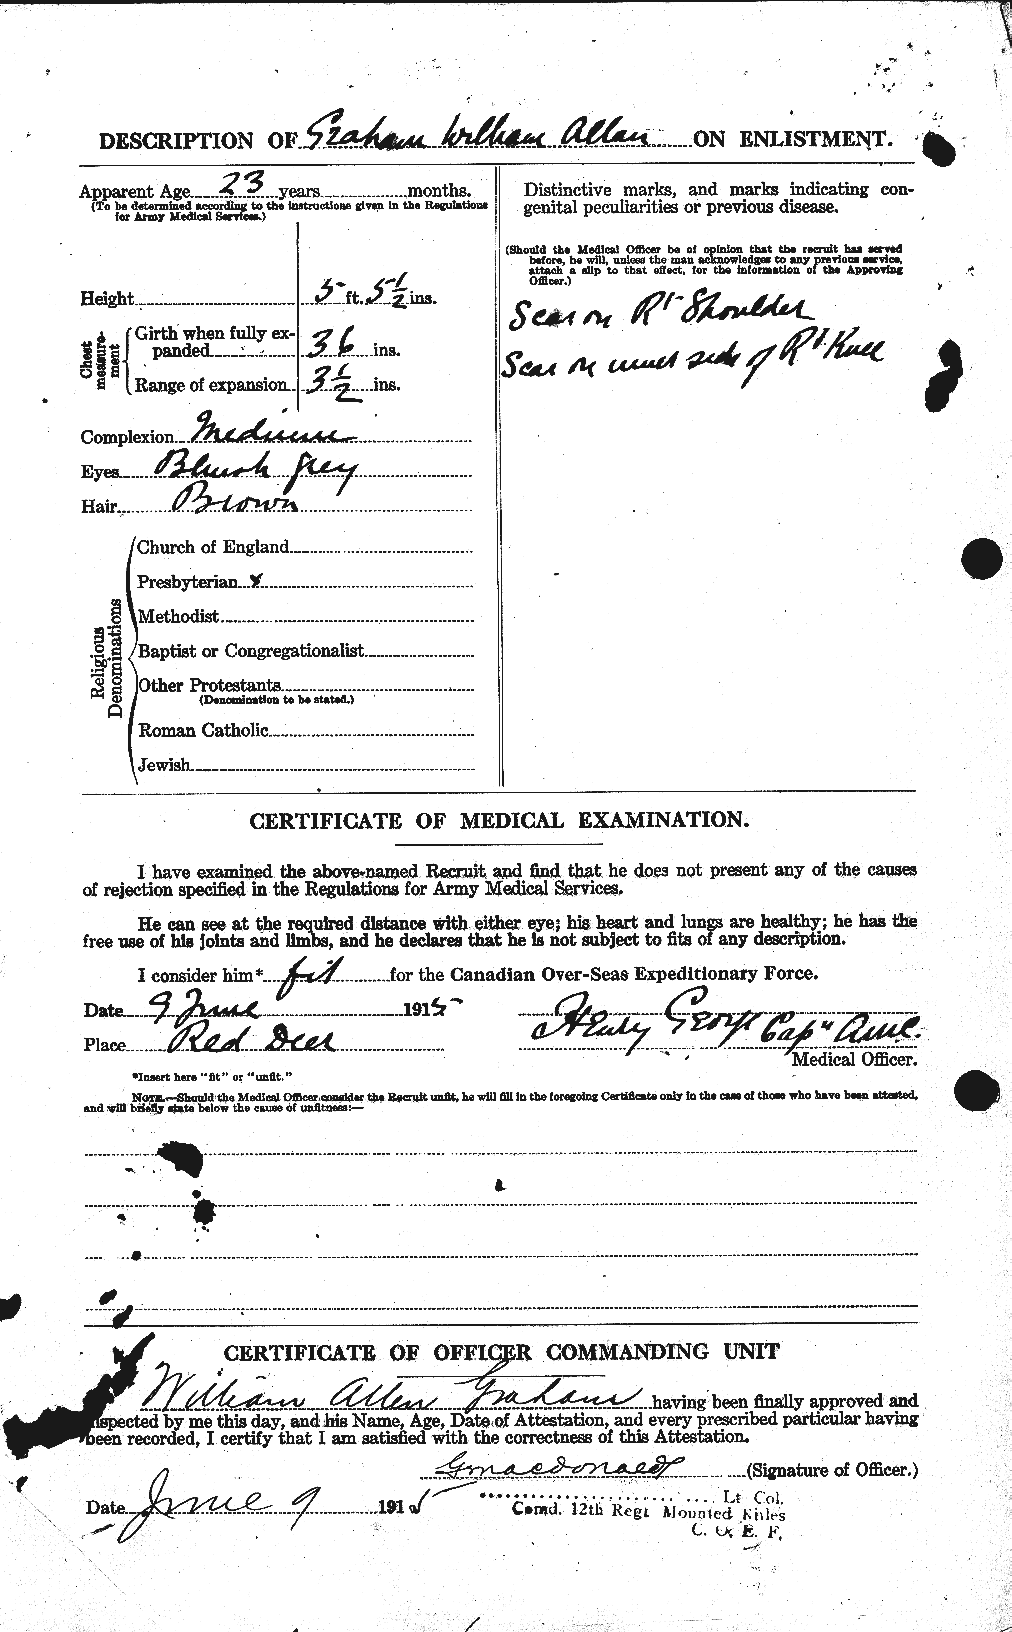 Personnel Records of the First World War - CEF 358021b